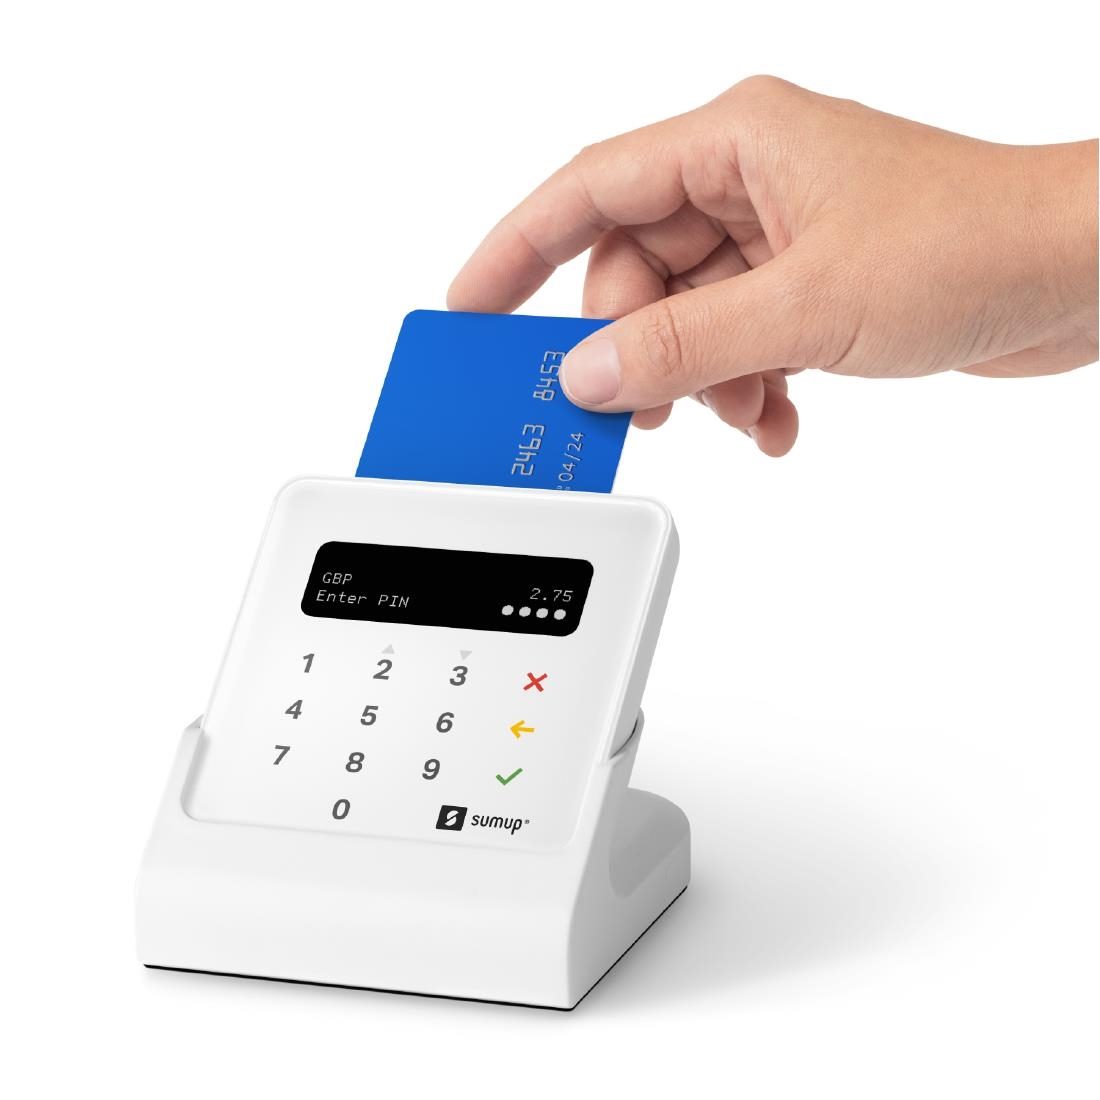 Compare SumUp card readers to find the best terminal for you